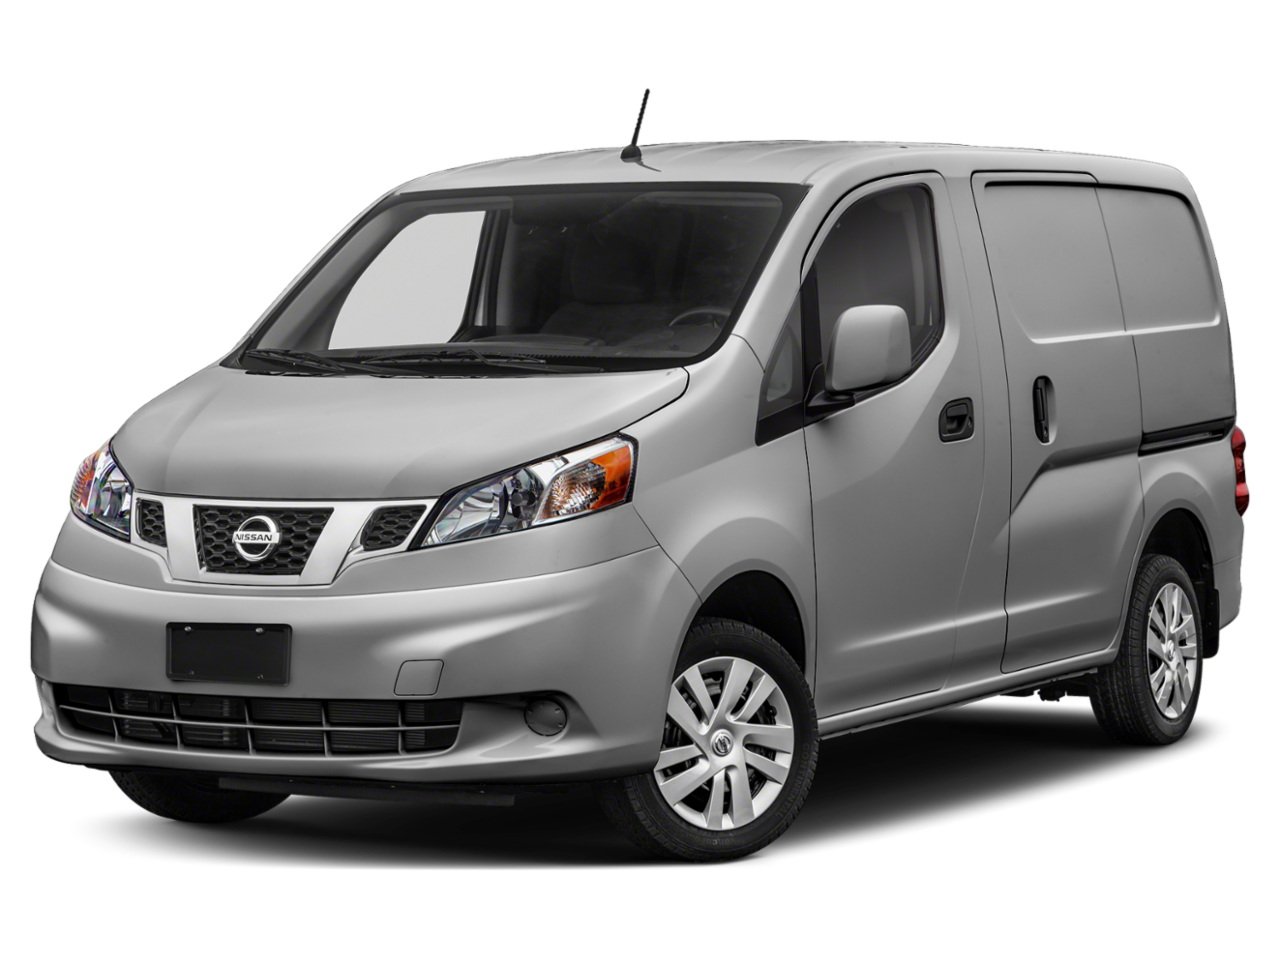 2021 Nissan NV200 Compact Cargo lease $949 Mo $0 Down Leases Available